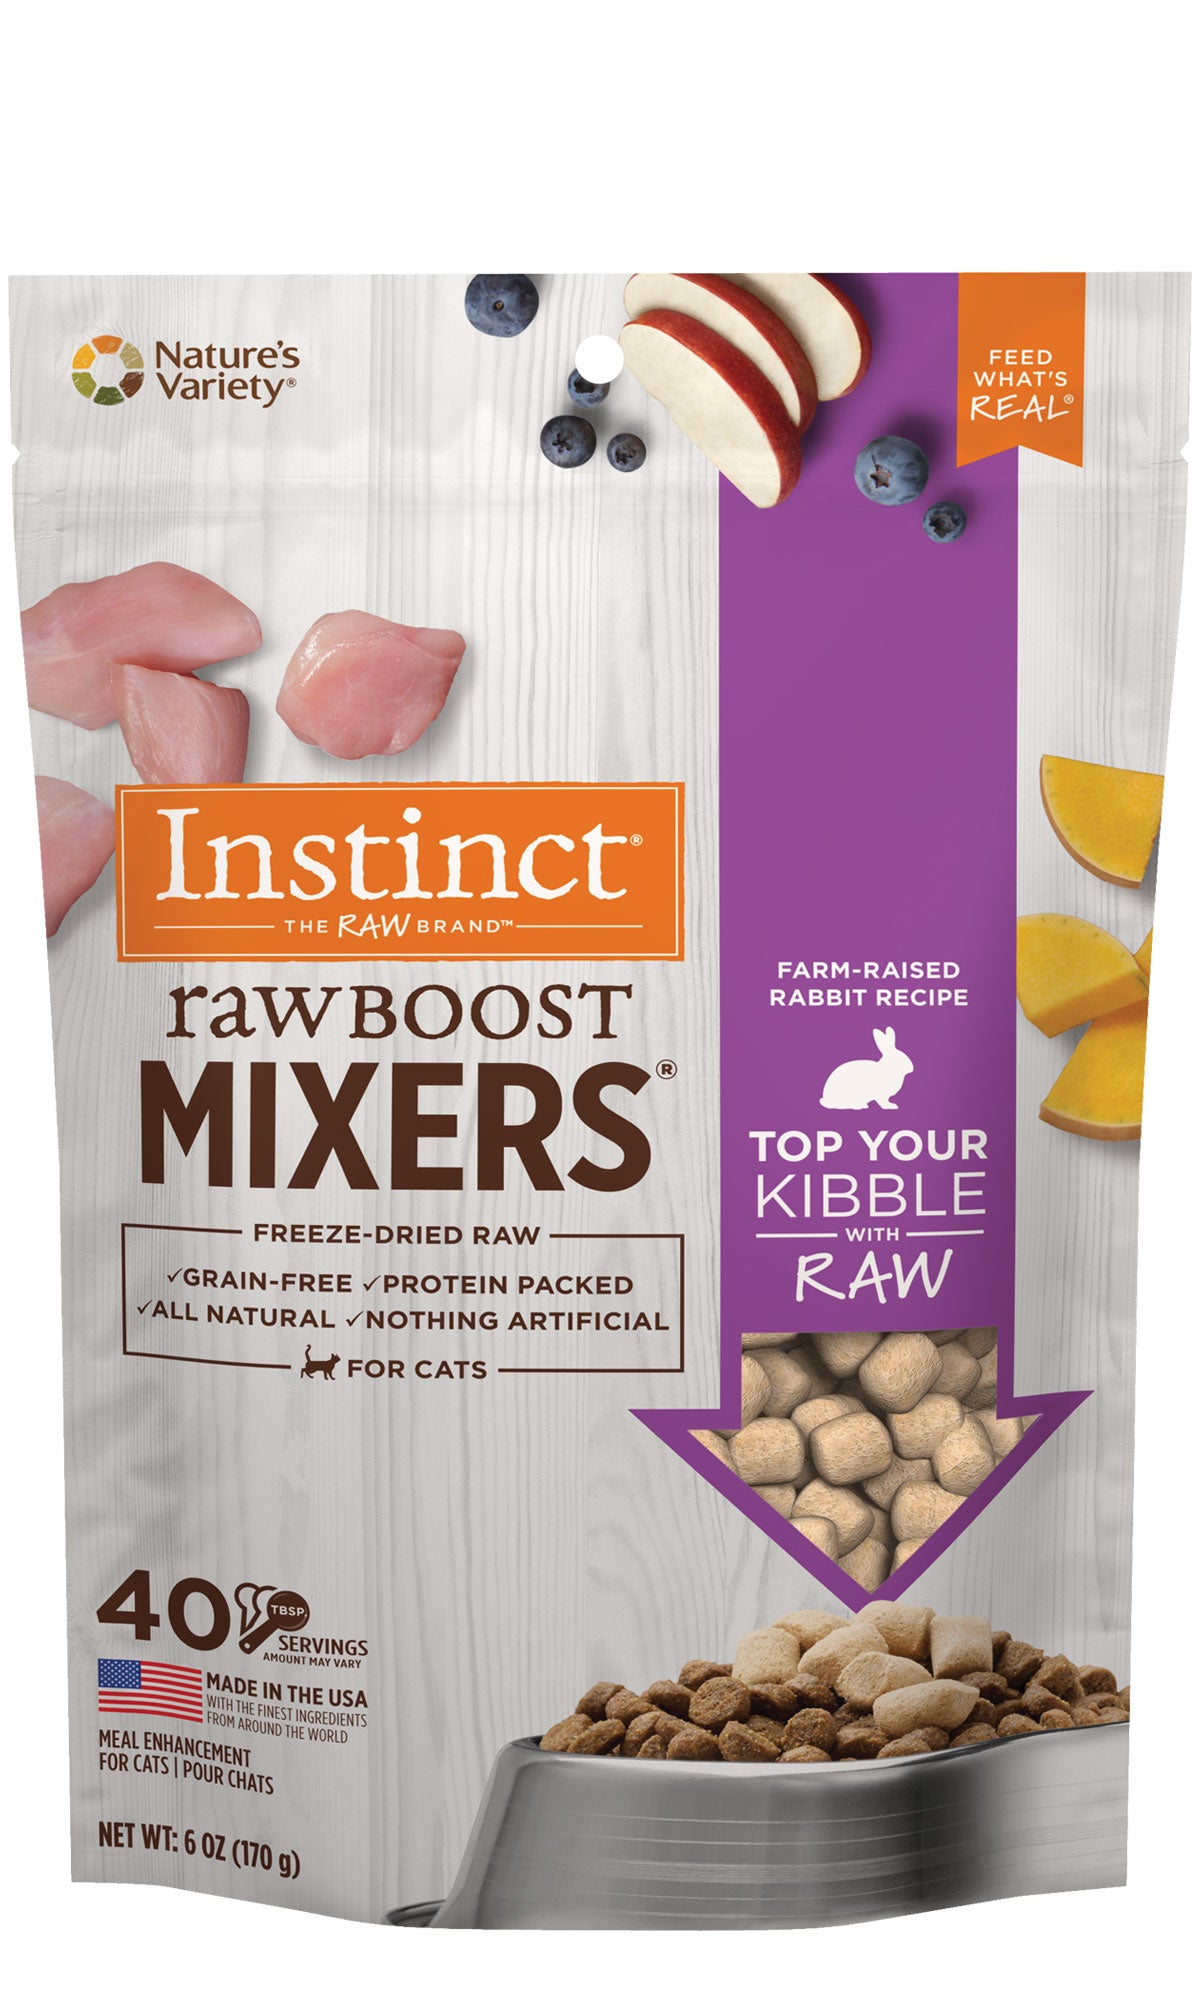 Nature's Variety Instinct Raw Boost Mixers Grain Free Rabbit Topper for Cats 6oz